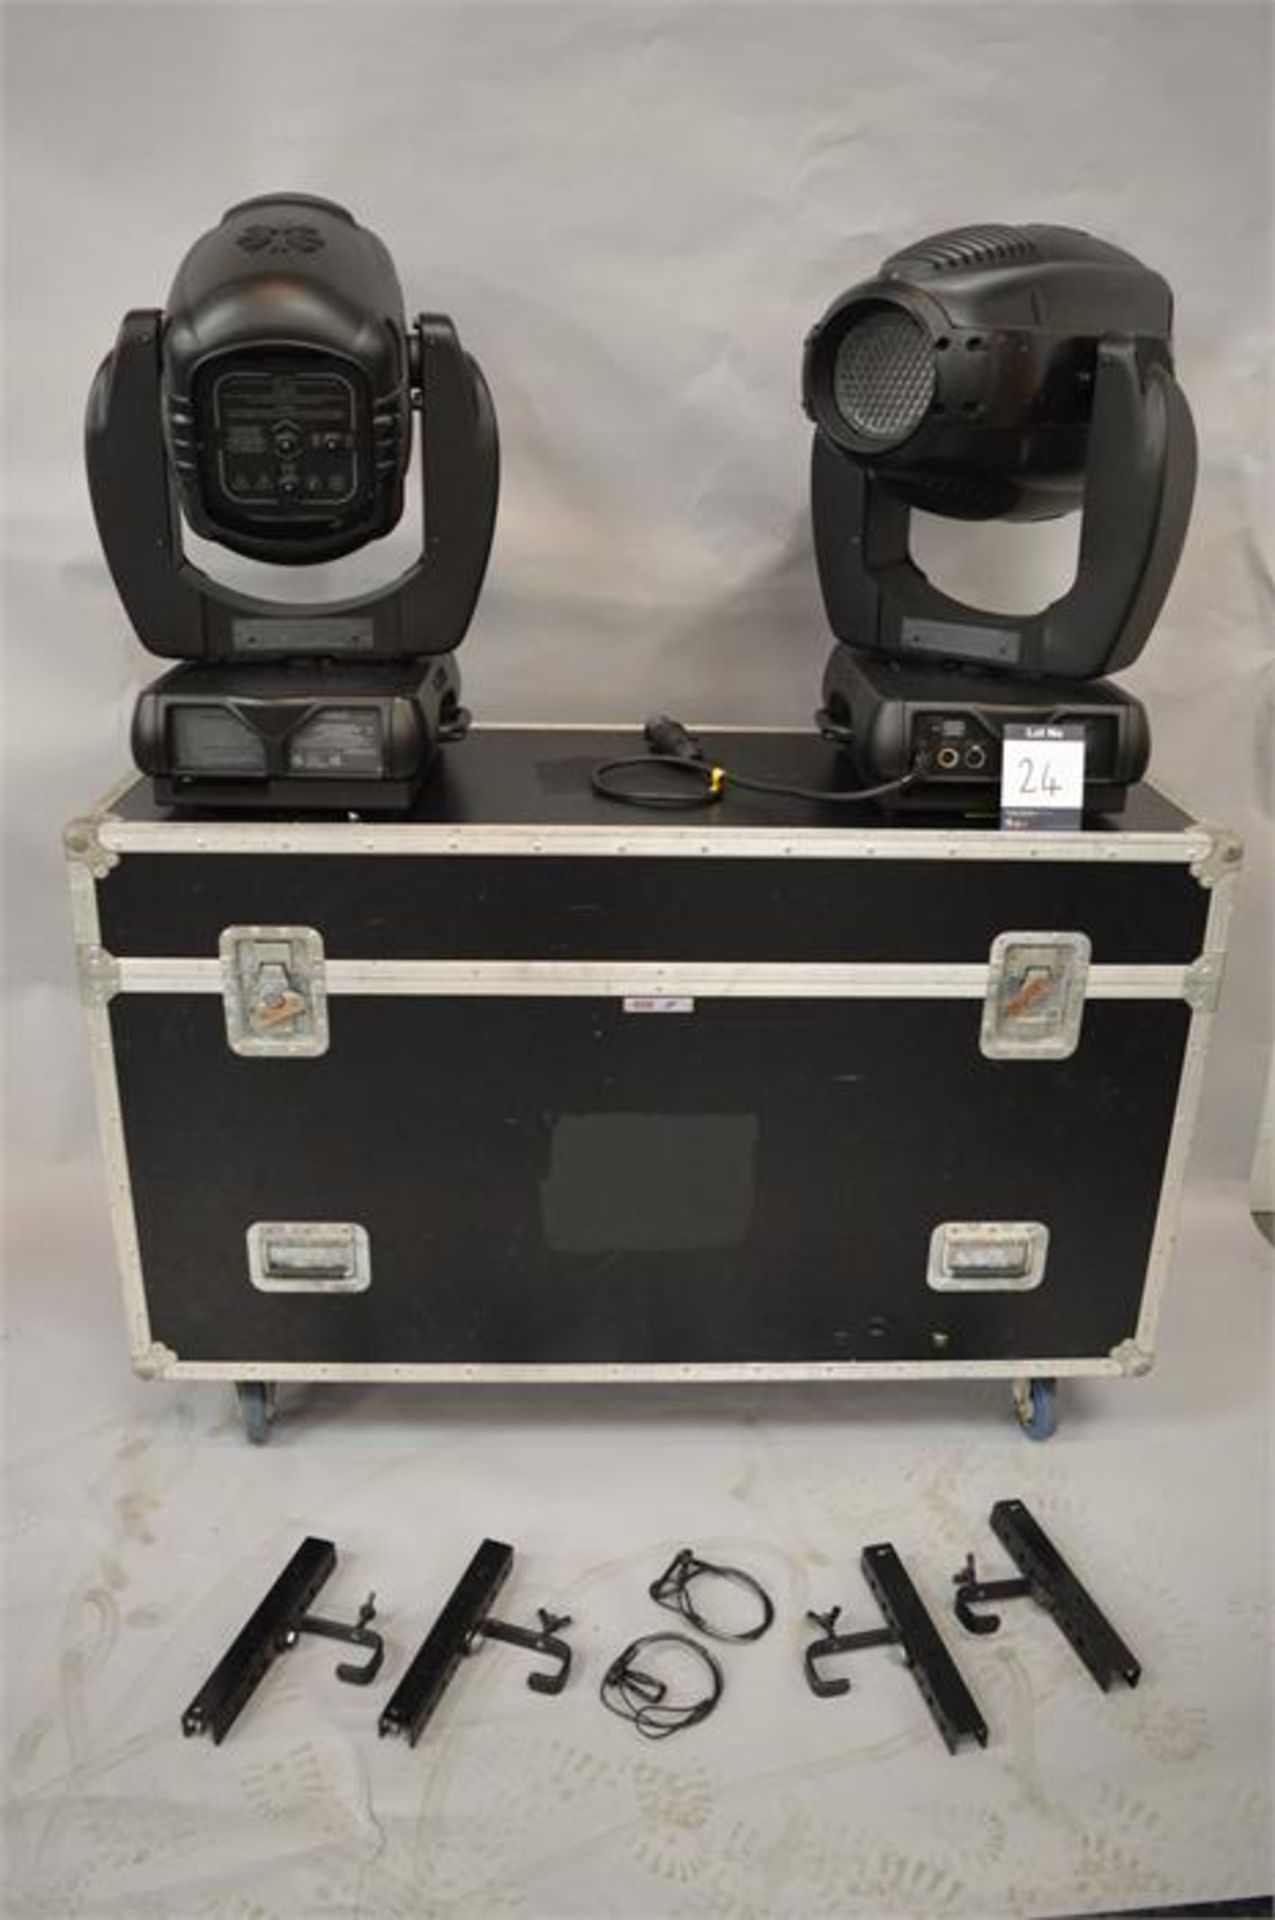 2 x Varilite, VL3000QW Wash Moving Head Lights with Flightcase and associated Brackets, as lotted - Image 2 of 4